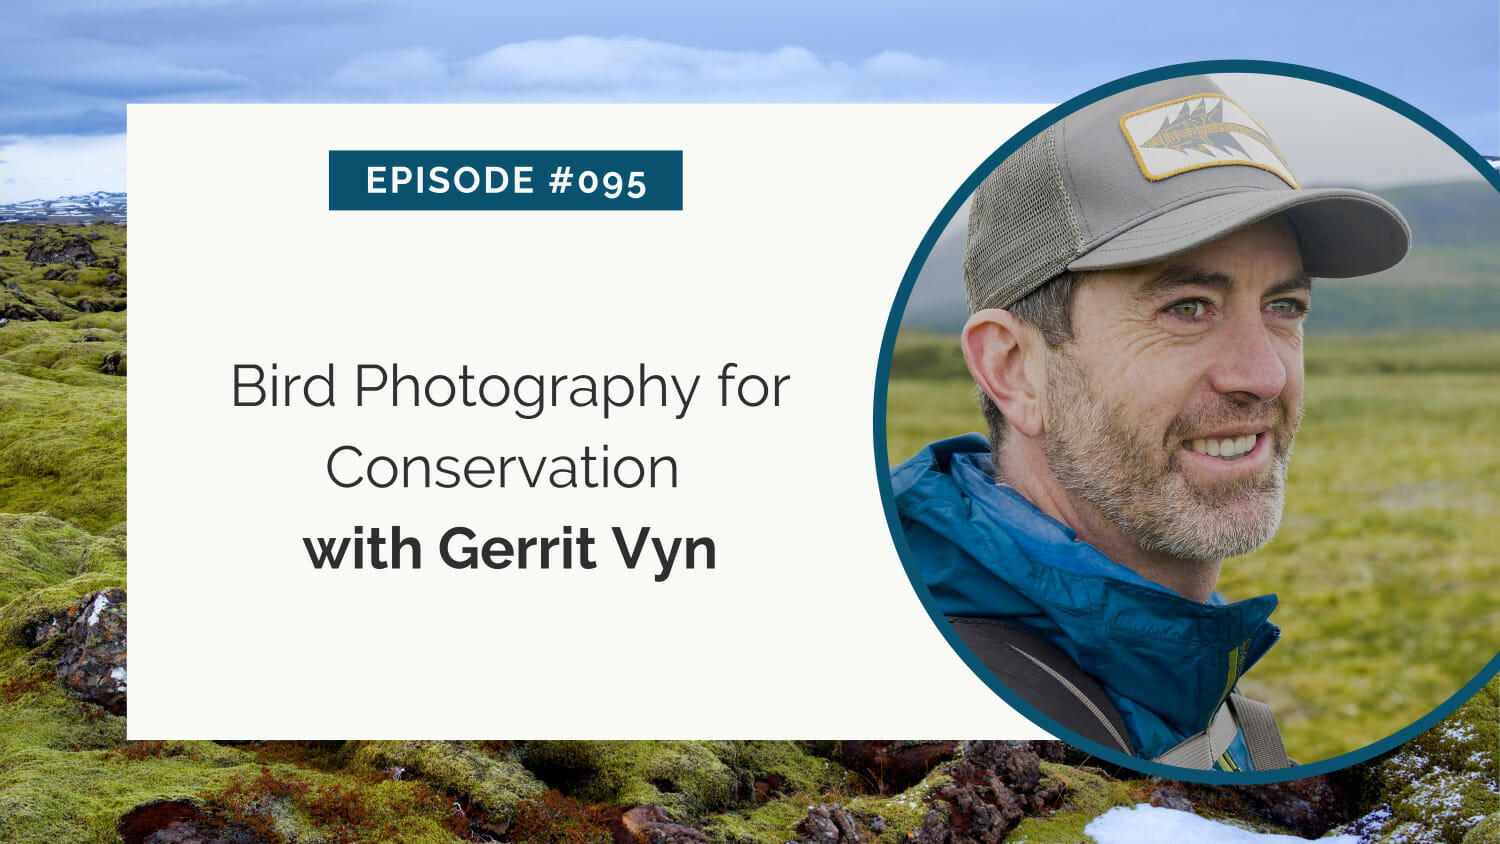 A man in a blue jacket is featured alongside text indicating an episode about bird photography for conservation with gerrit vyn.